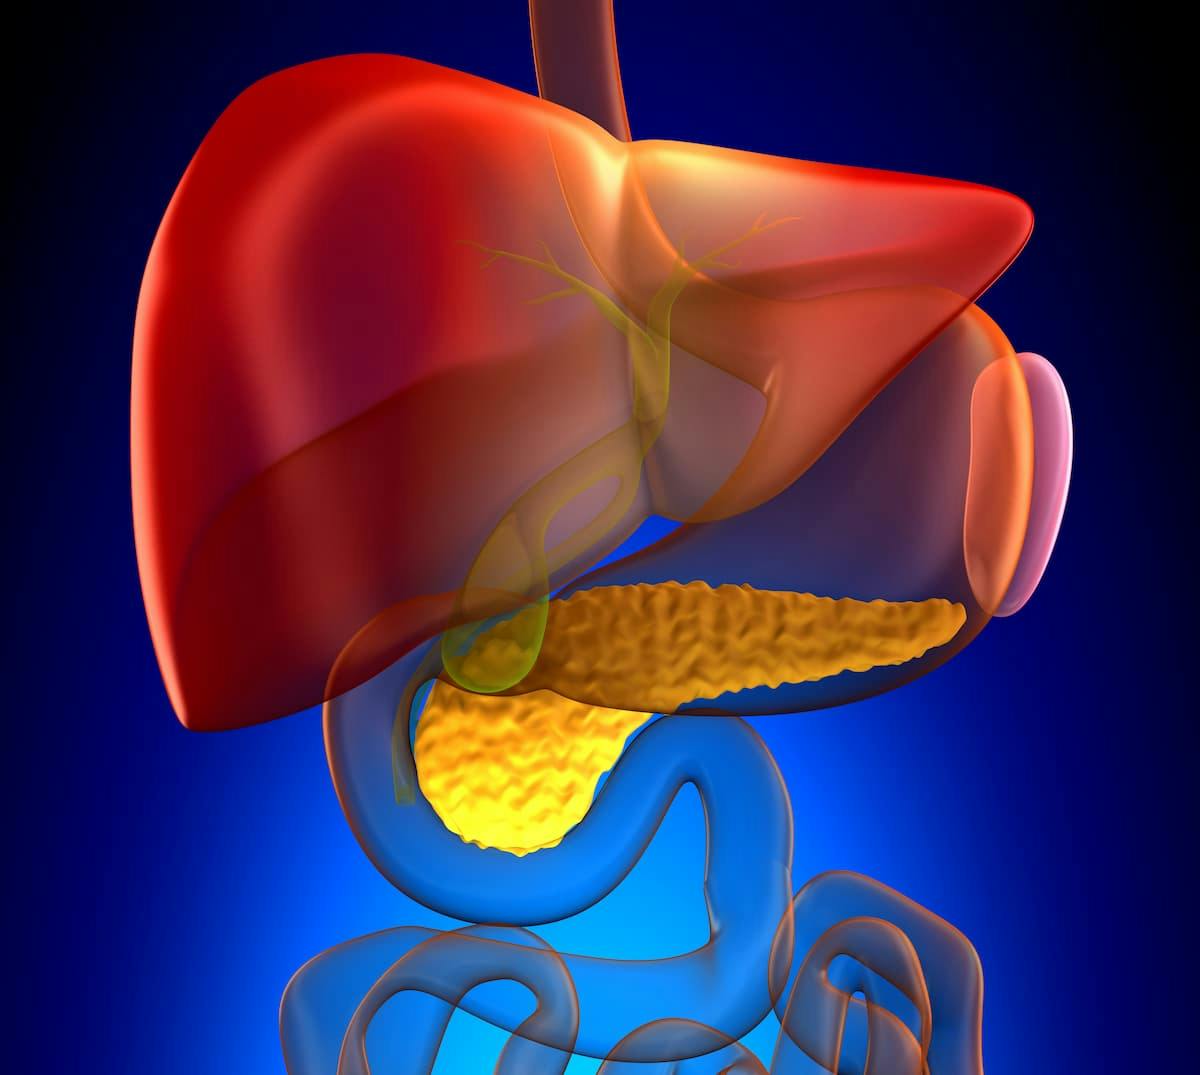 Findings from the phase 3 LEAP-002 study indicate that the addition of pembrolizumab to lenvatinib did not impact quality-of-life scores among patients with hepatocellular carcinoma.